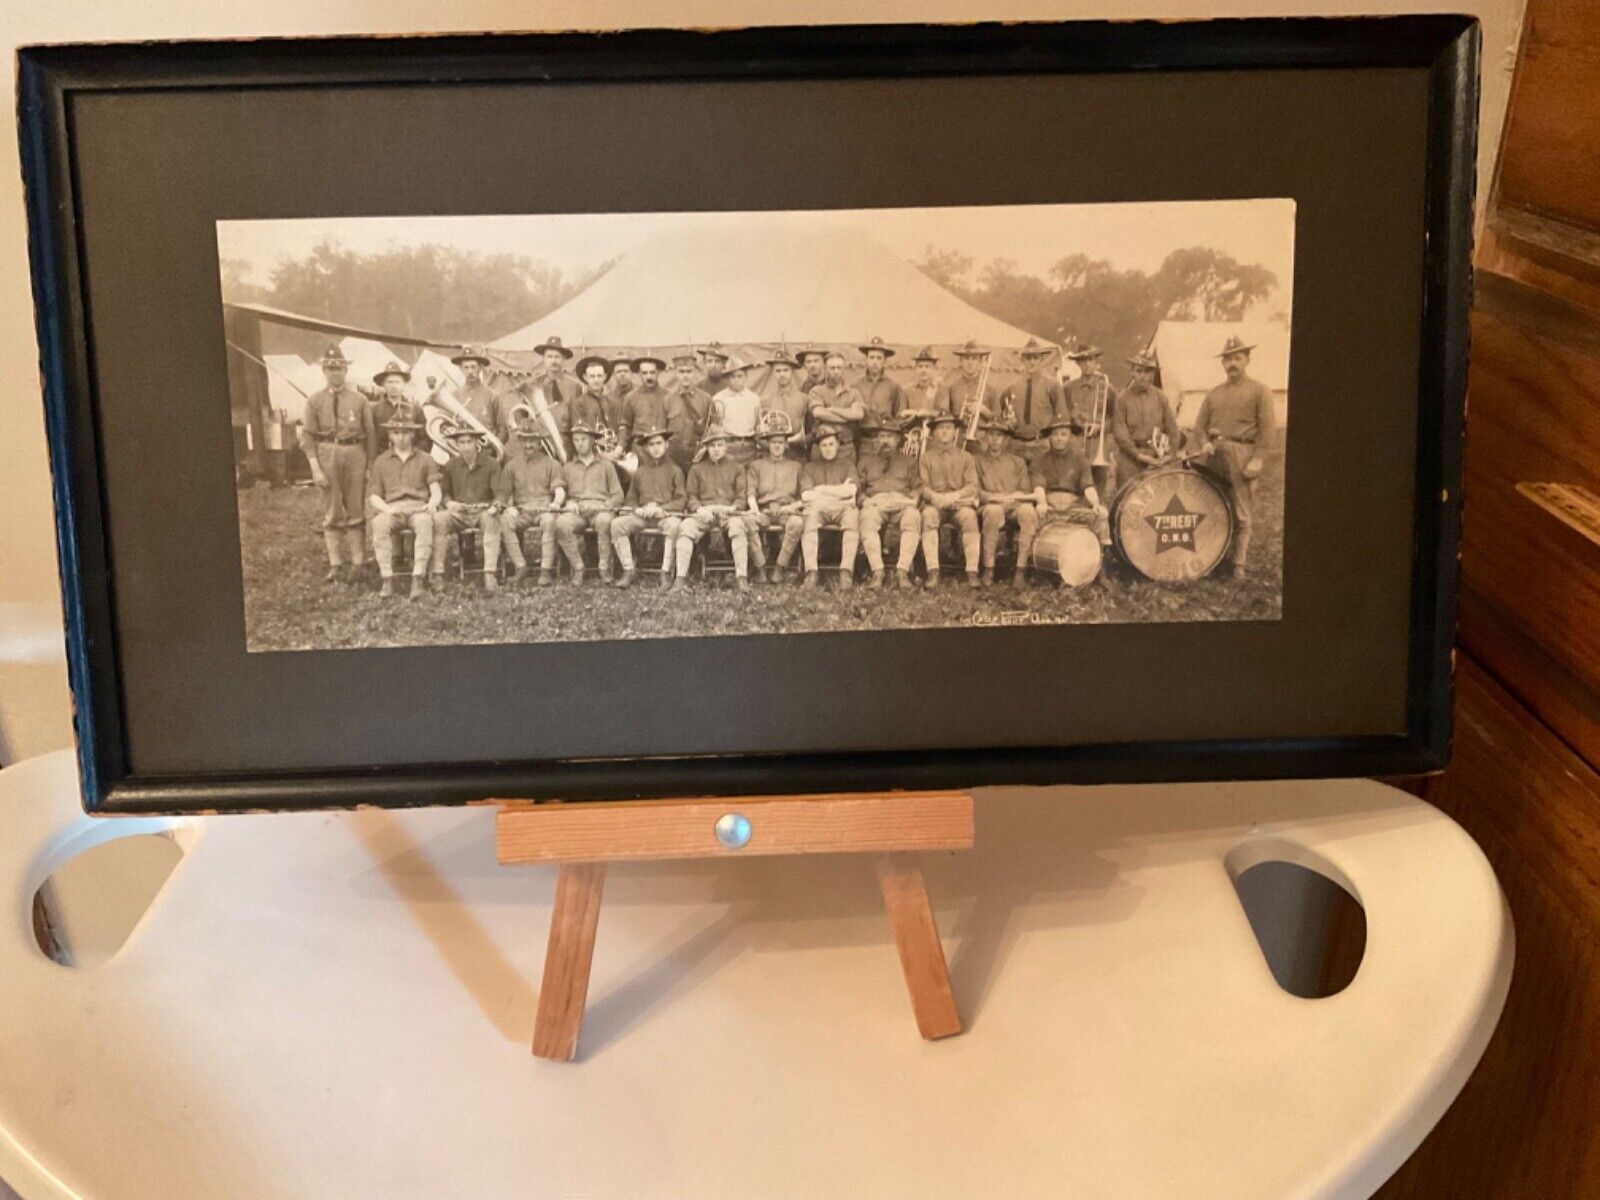 VTG 1911 PHOTO MILITARY CAMP PERRY ONG ZANESVILLE OH BAND PIC 7TH REGT FRAMED